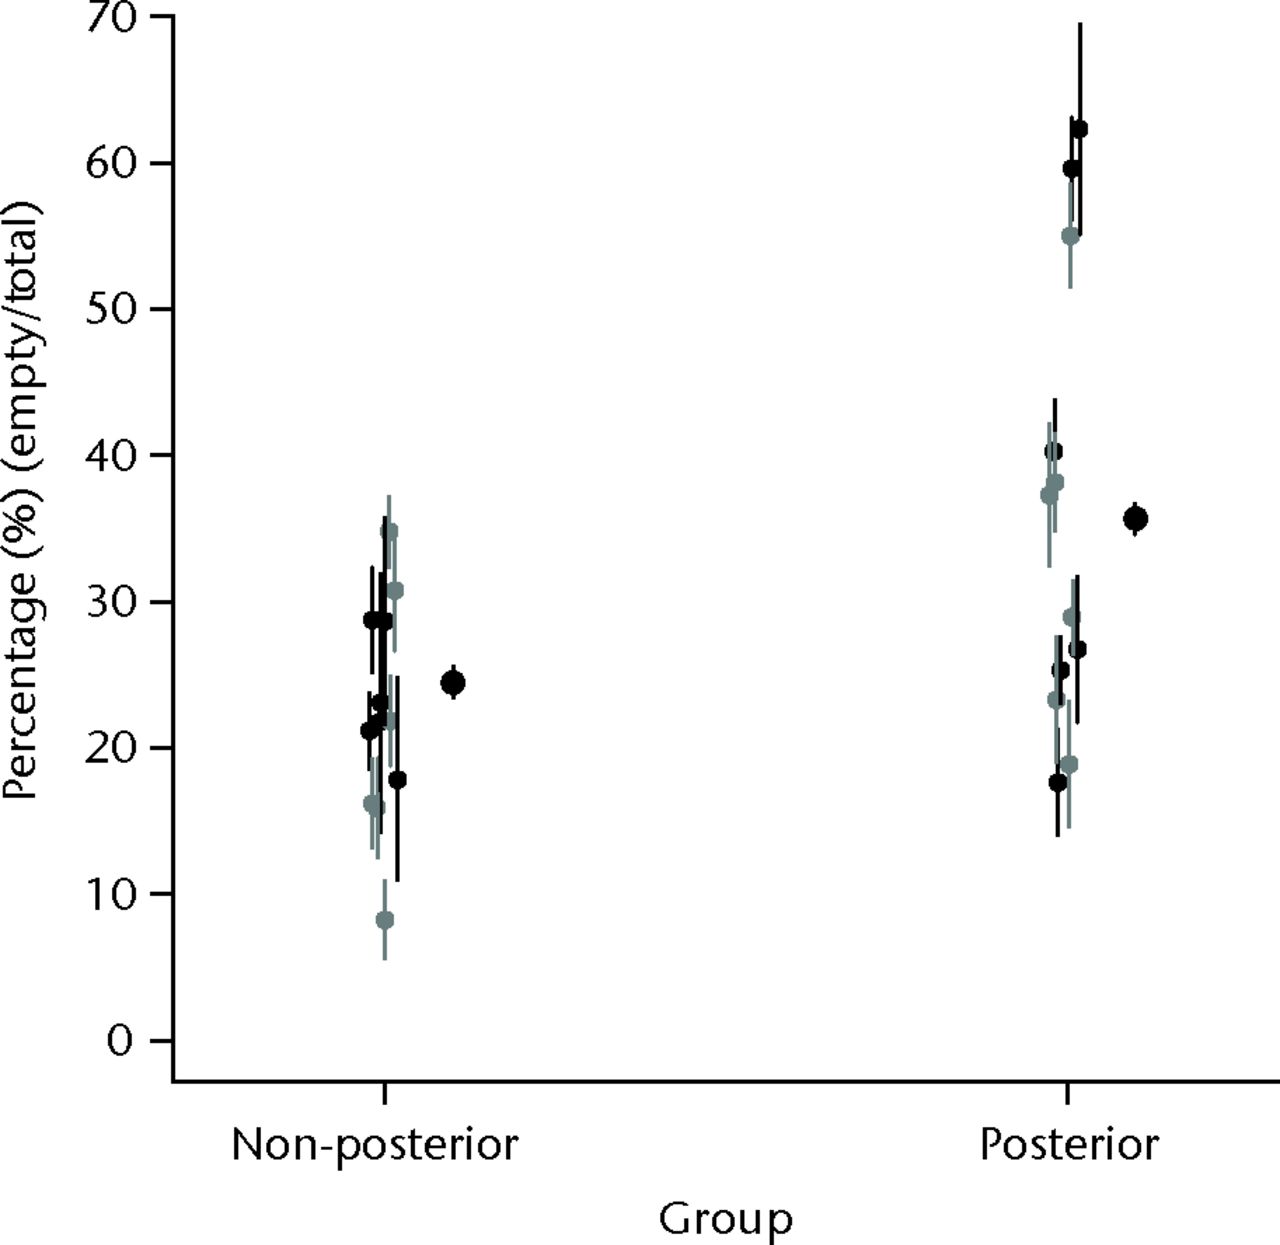 Fig. 3 
          Strip plot of the mean percentage empty
nuclei (bars represent 95% confidence intervals), by group (non-posterior
and posterior), with shading to indicate section (anterior, black;
posterior, grey) within groups; the x-axis values have been jittered
by adding a small random component to aid presentation.
        